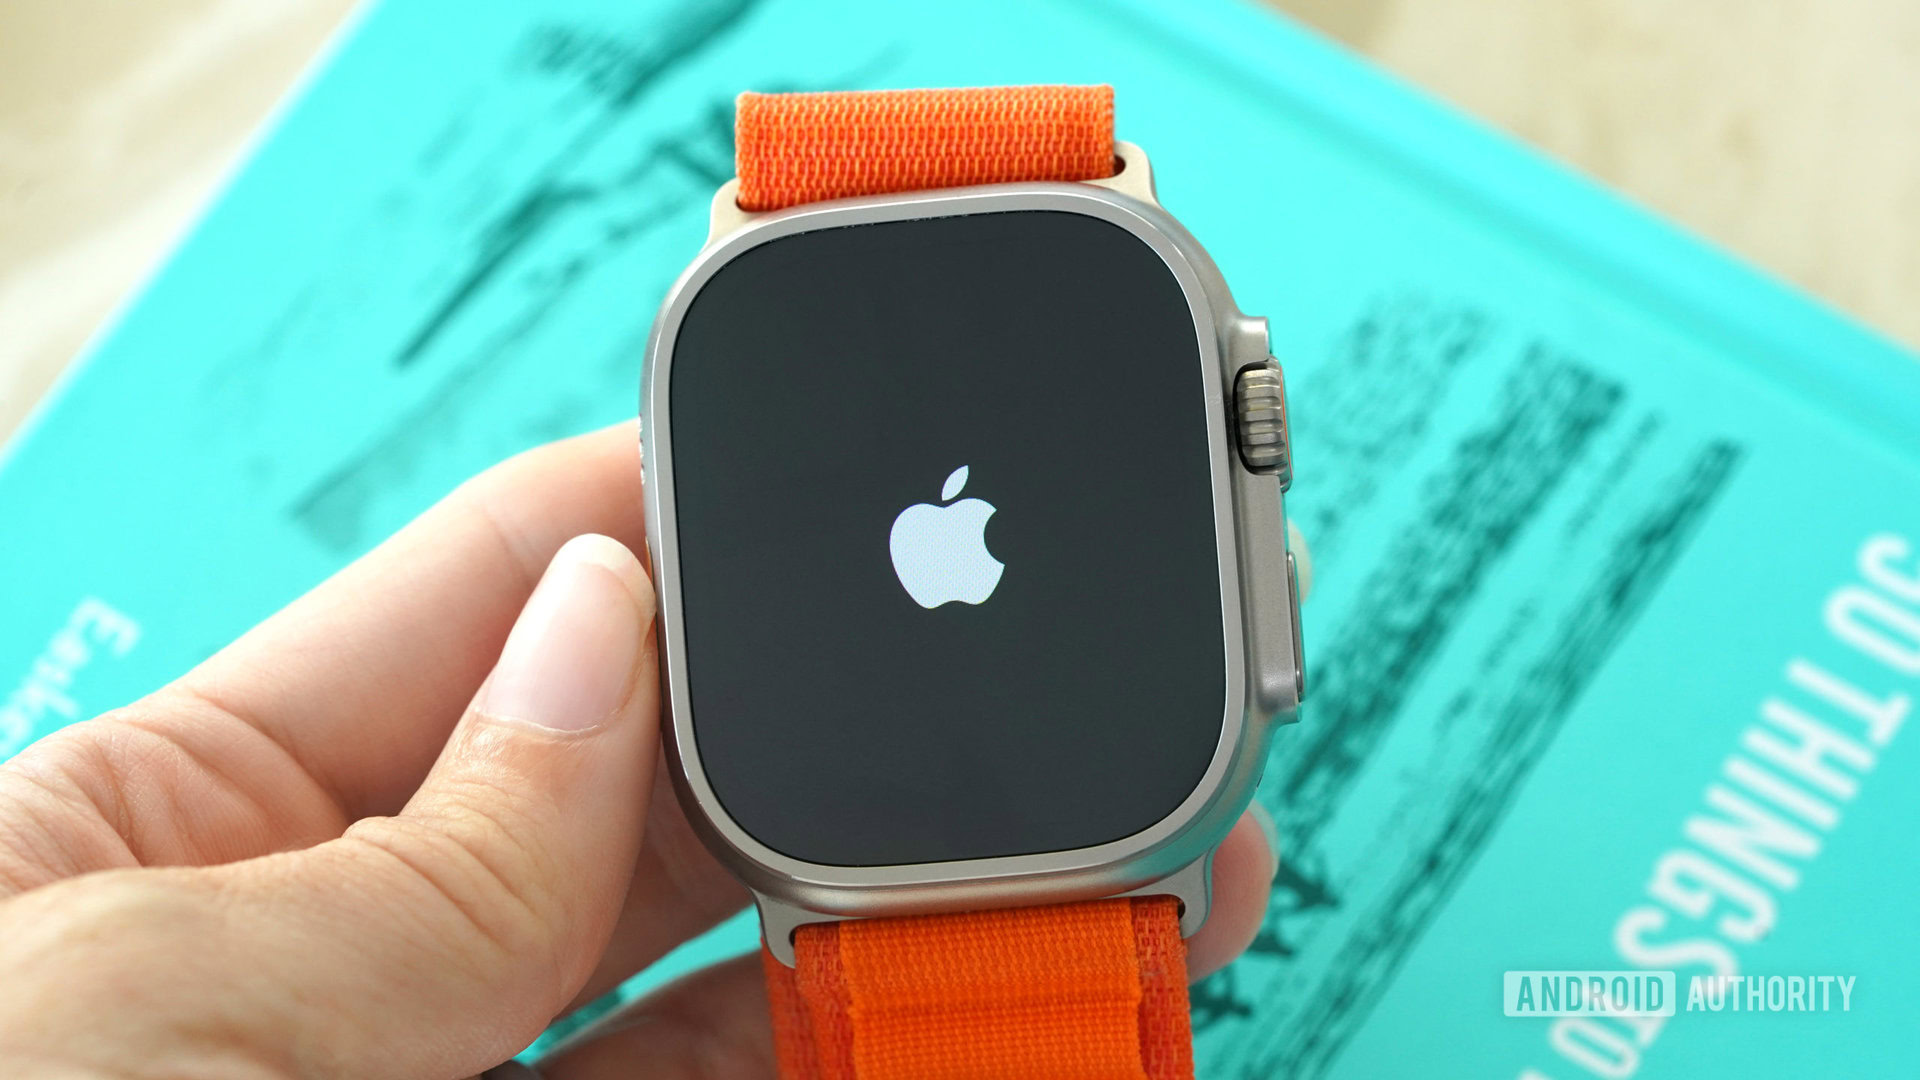 Apple Watch Stuck on Apple Logo? Try These Fixes